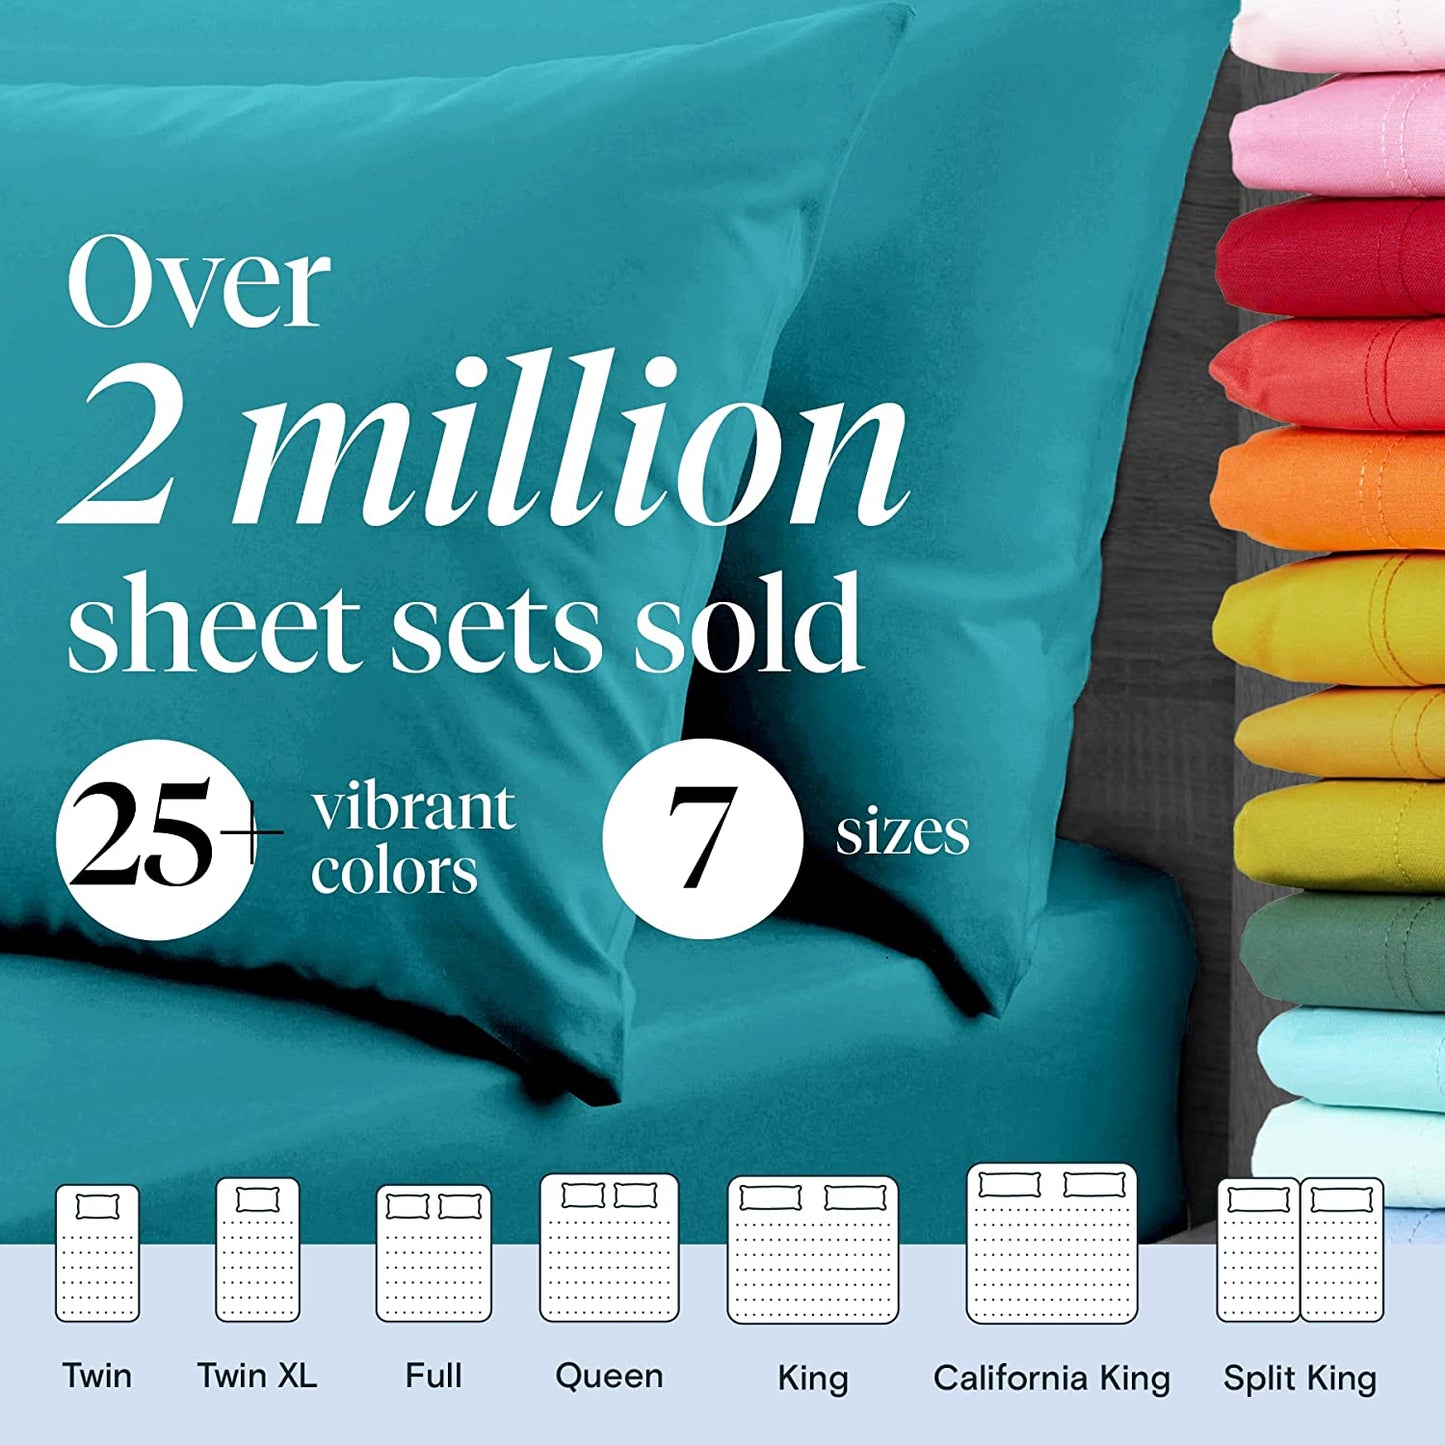 LuxClub 6 PC Sheet Set Bamboo Sheets Deep Pockets 18" Eco Friendly Wrinkle Free Sheets Machine Washable Hotel Bedding Silky Soft - Teal Queen - Airbnb Ambassador